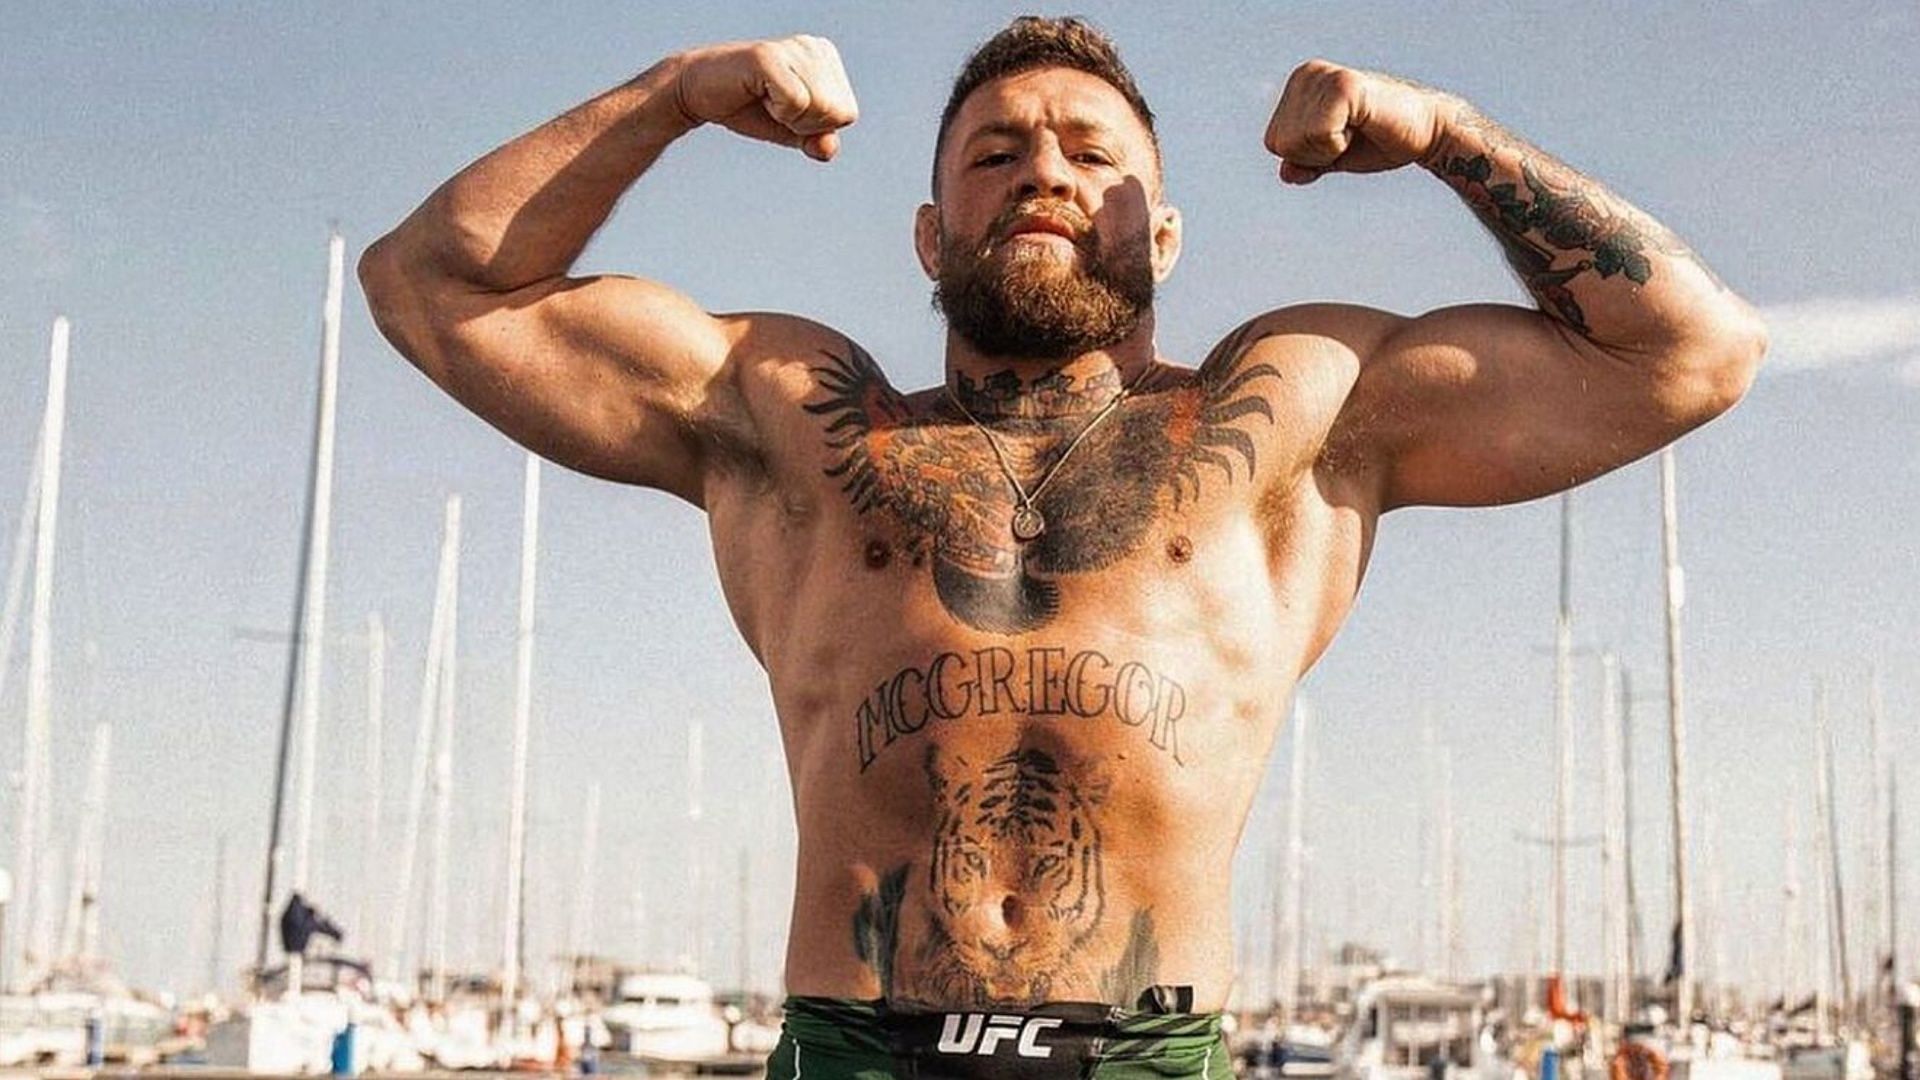 Conor McGregor remains one of UFC